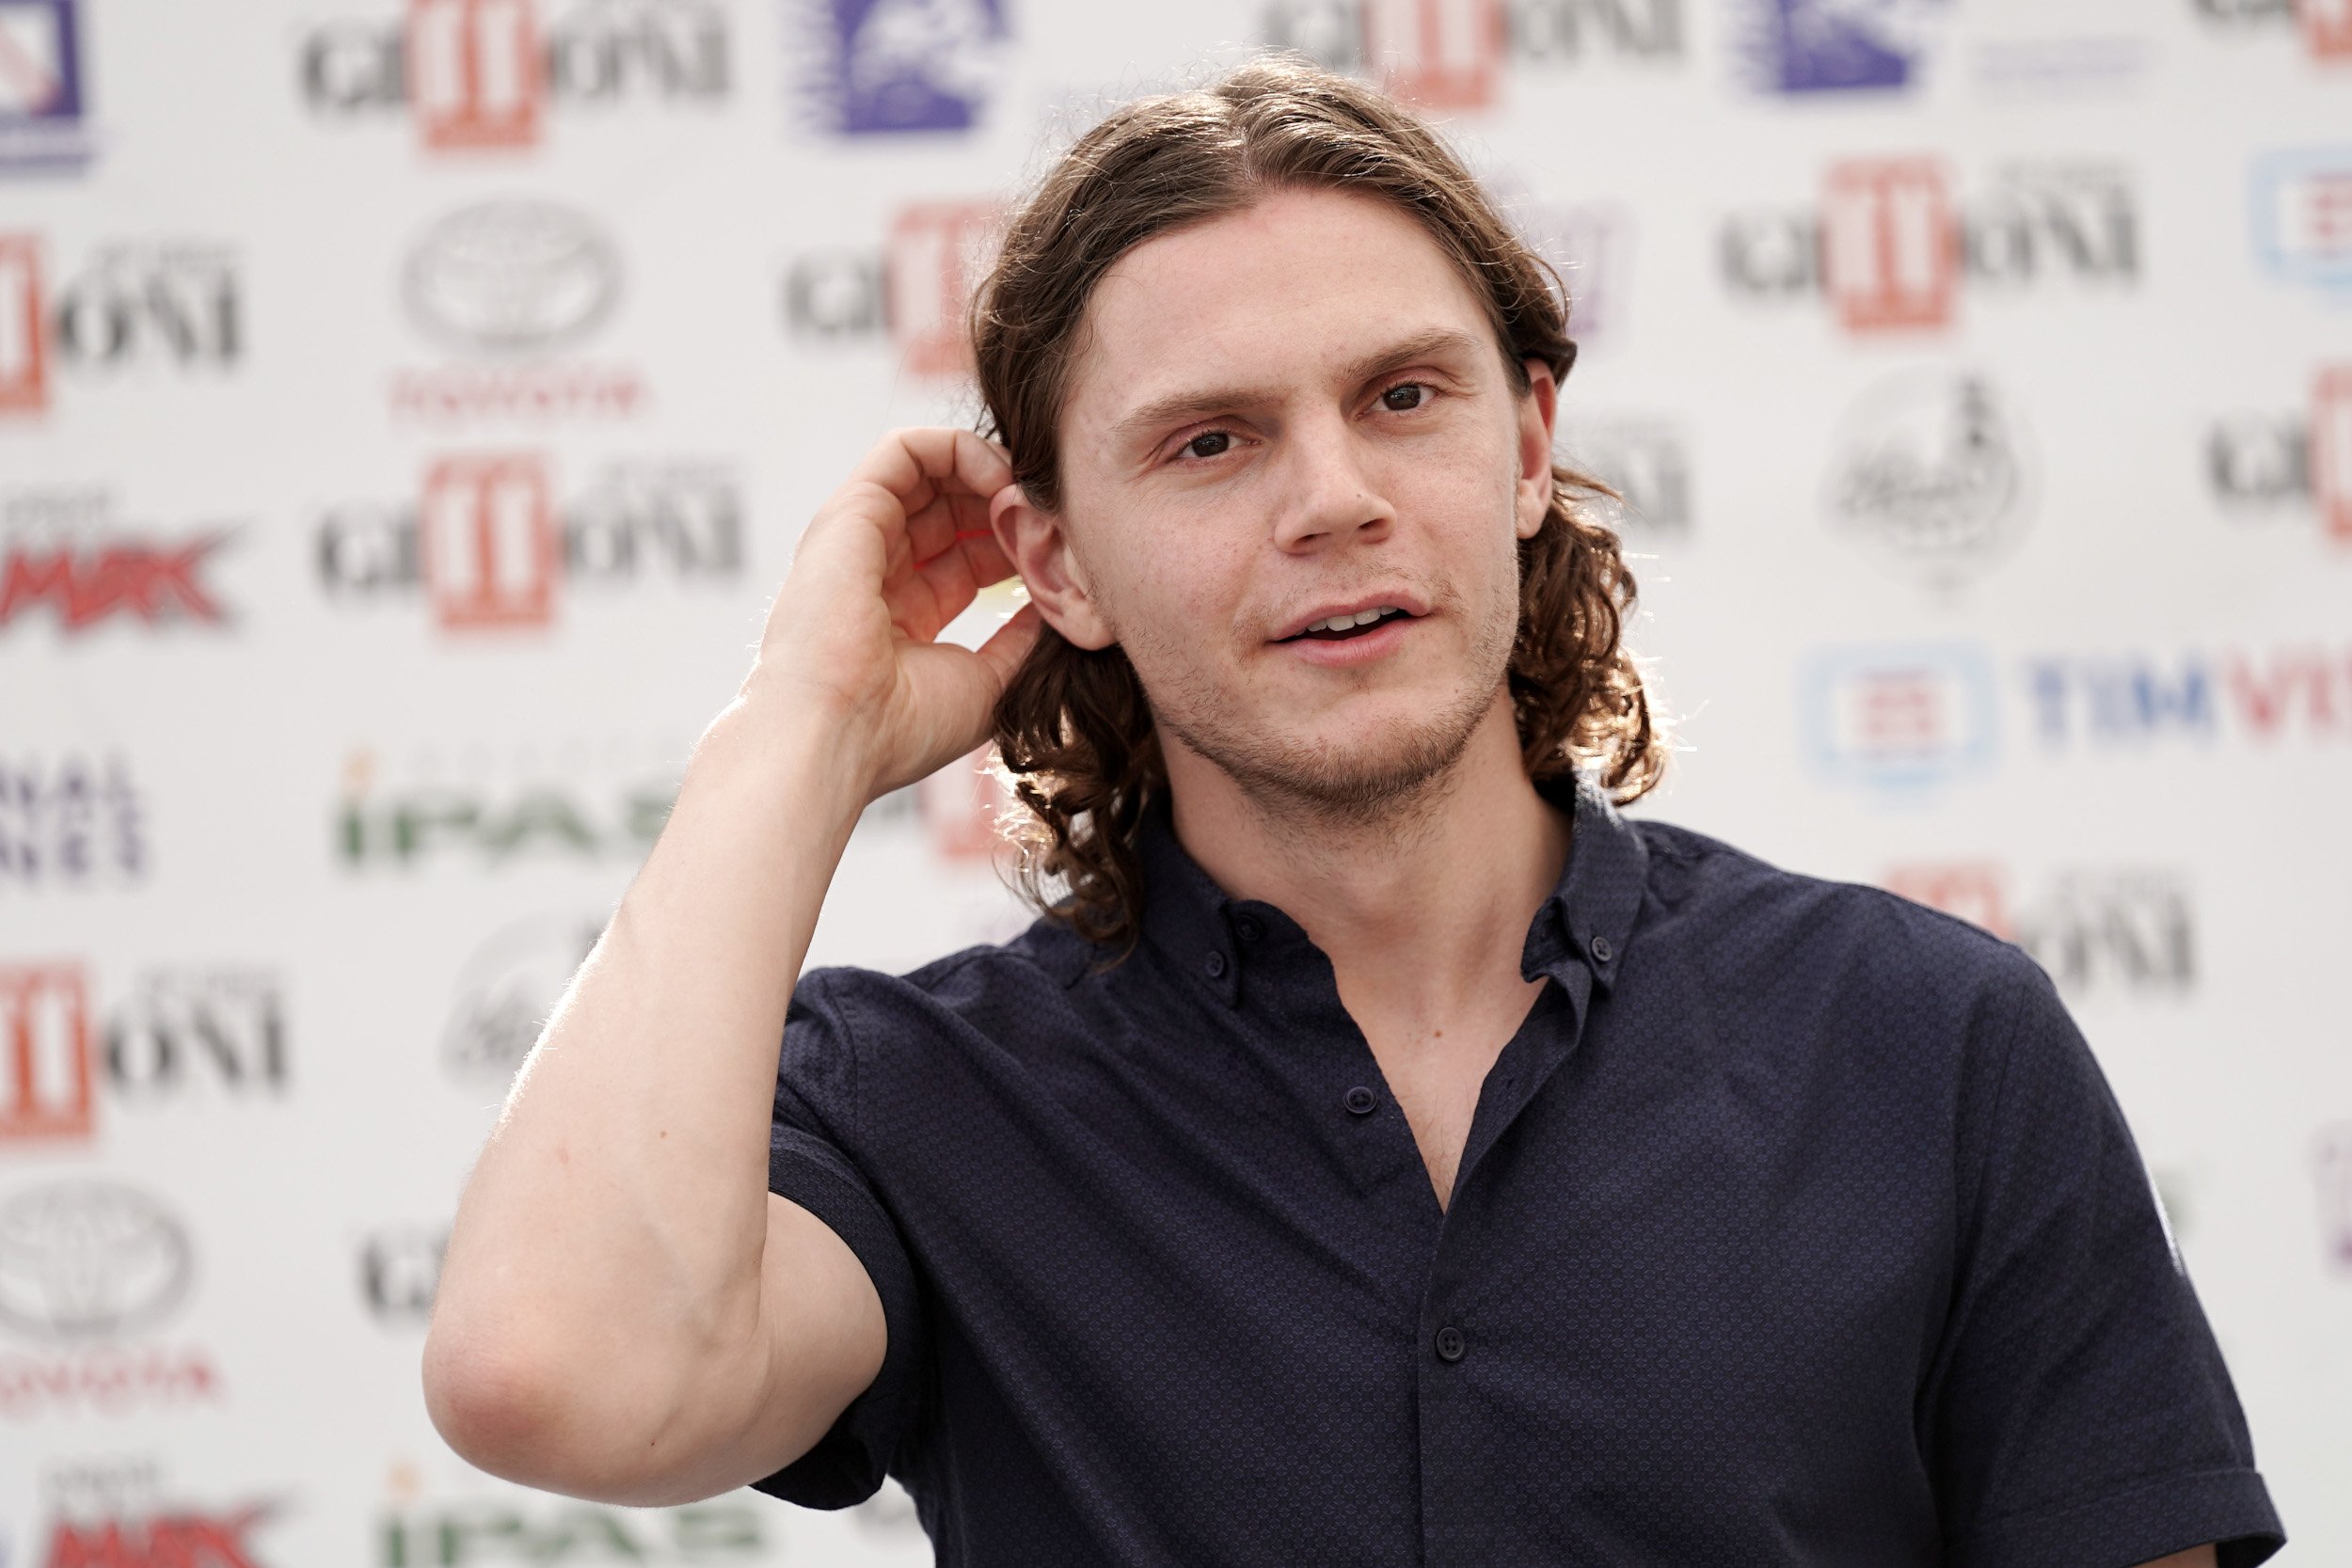 Evan Peters wears a black shirt and pushes his hair behind his ear during the Giffoni Film Festival